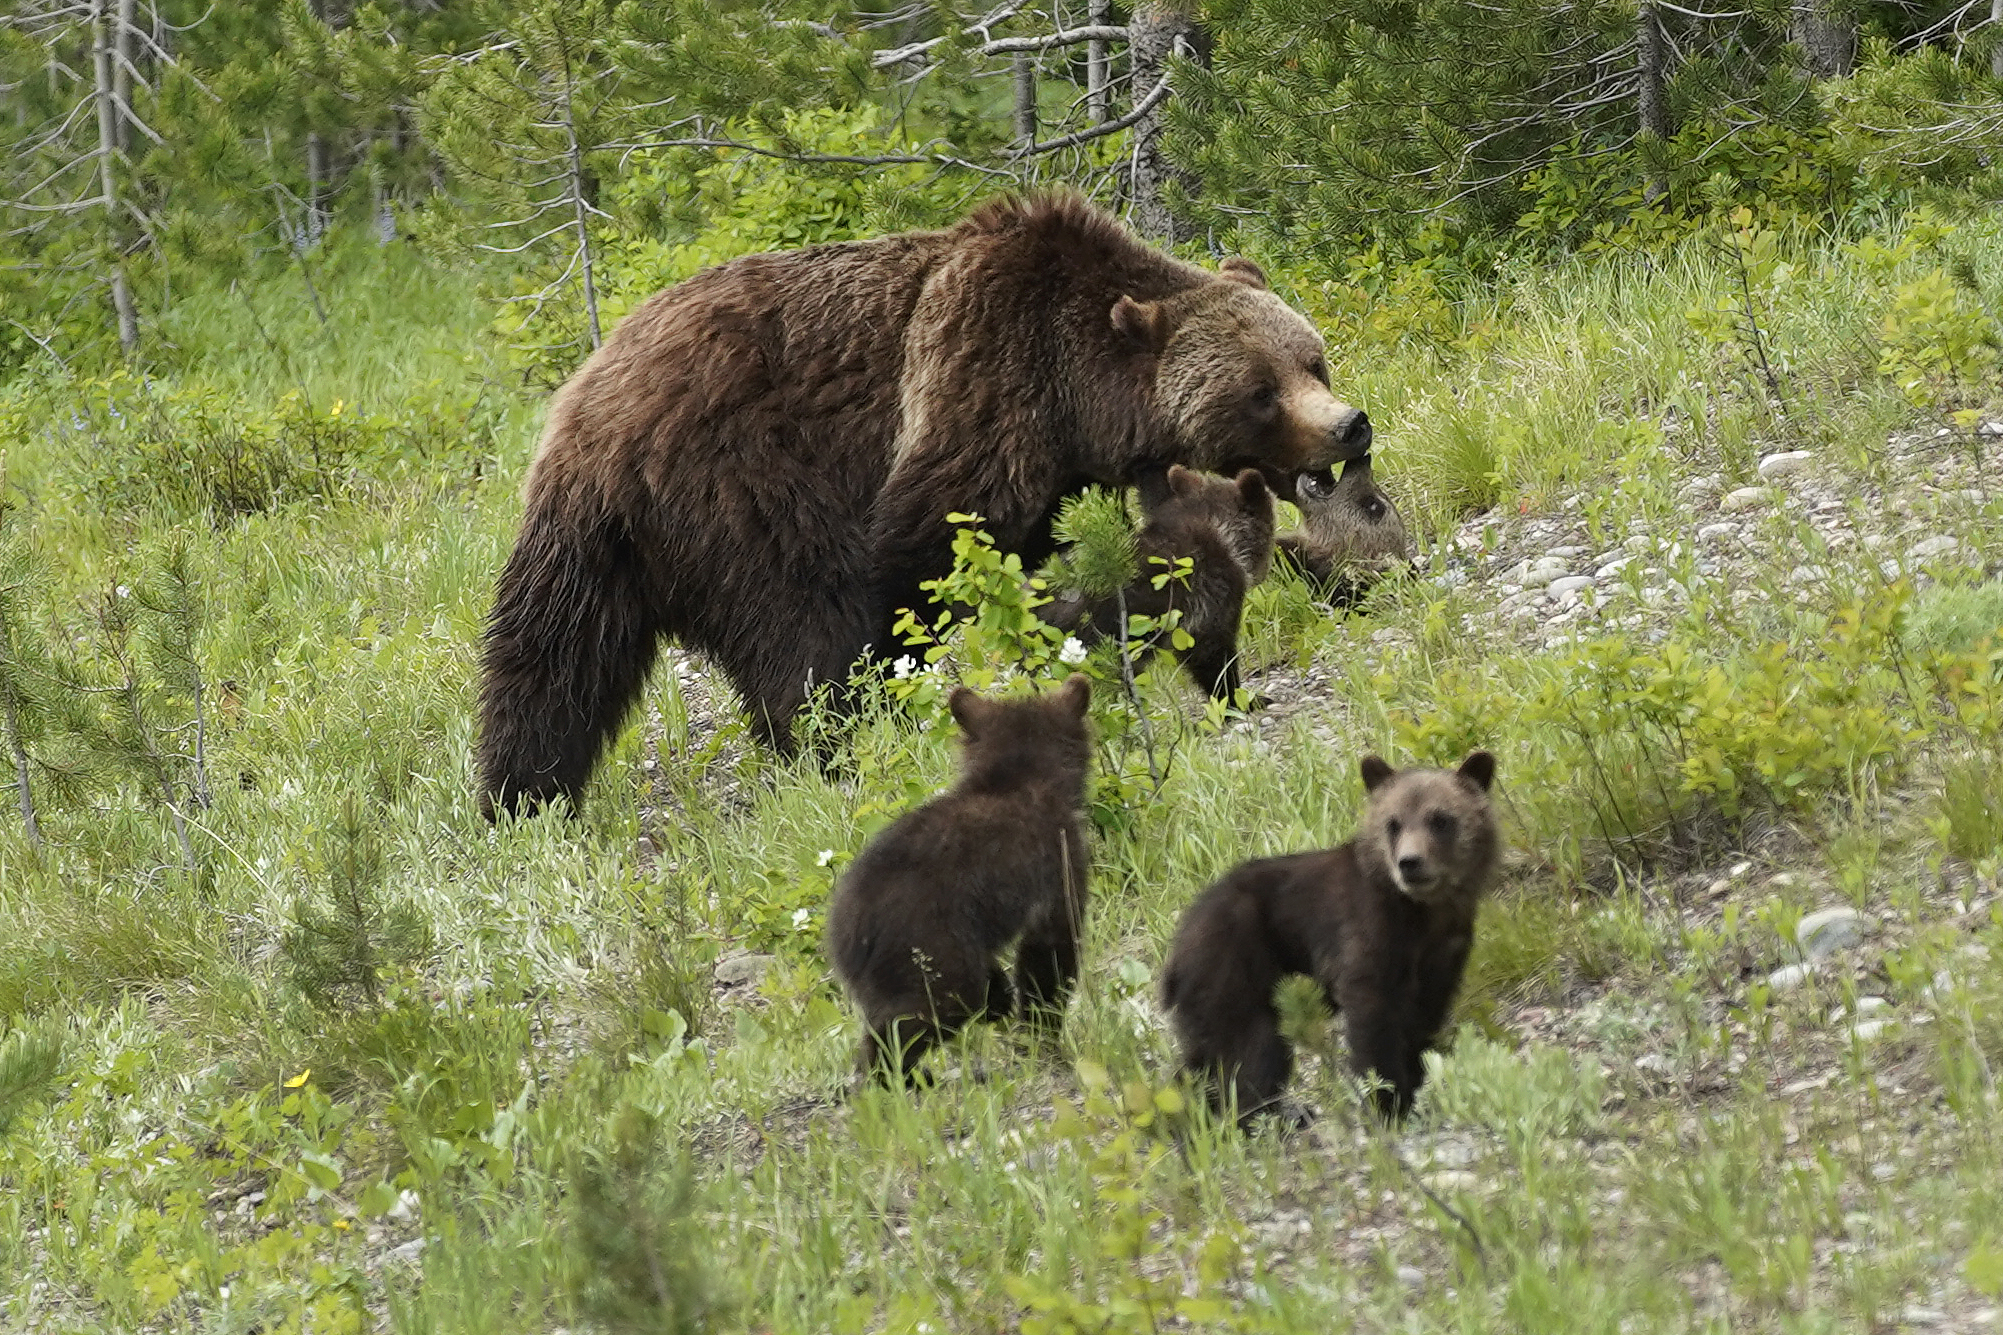 B.C. bears: Grizzly sow and 2 cubs trapped in Nelson